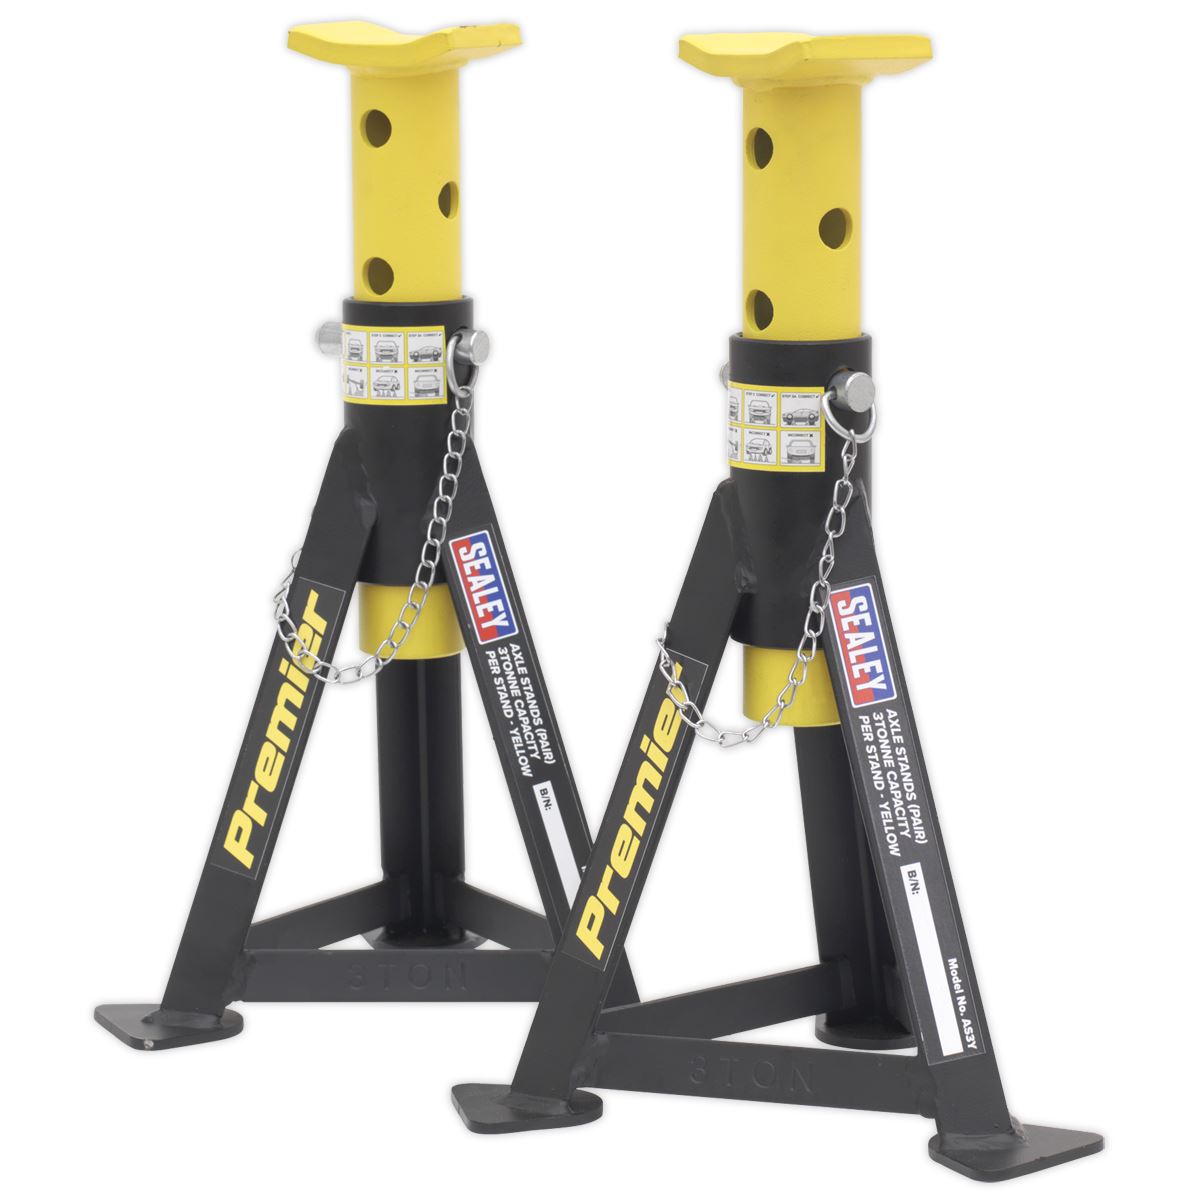 Sealey Premier Premier Axle Stands (Pair) 3 Tonne Capacity per Stand - Yellow